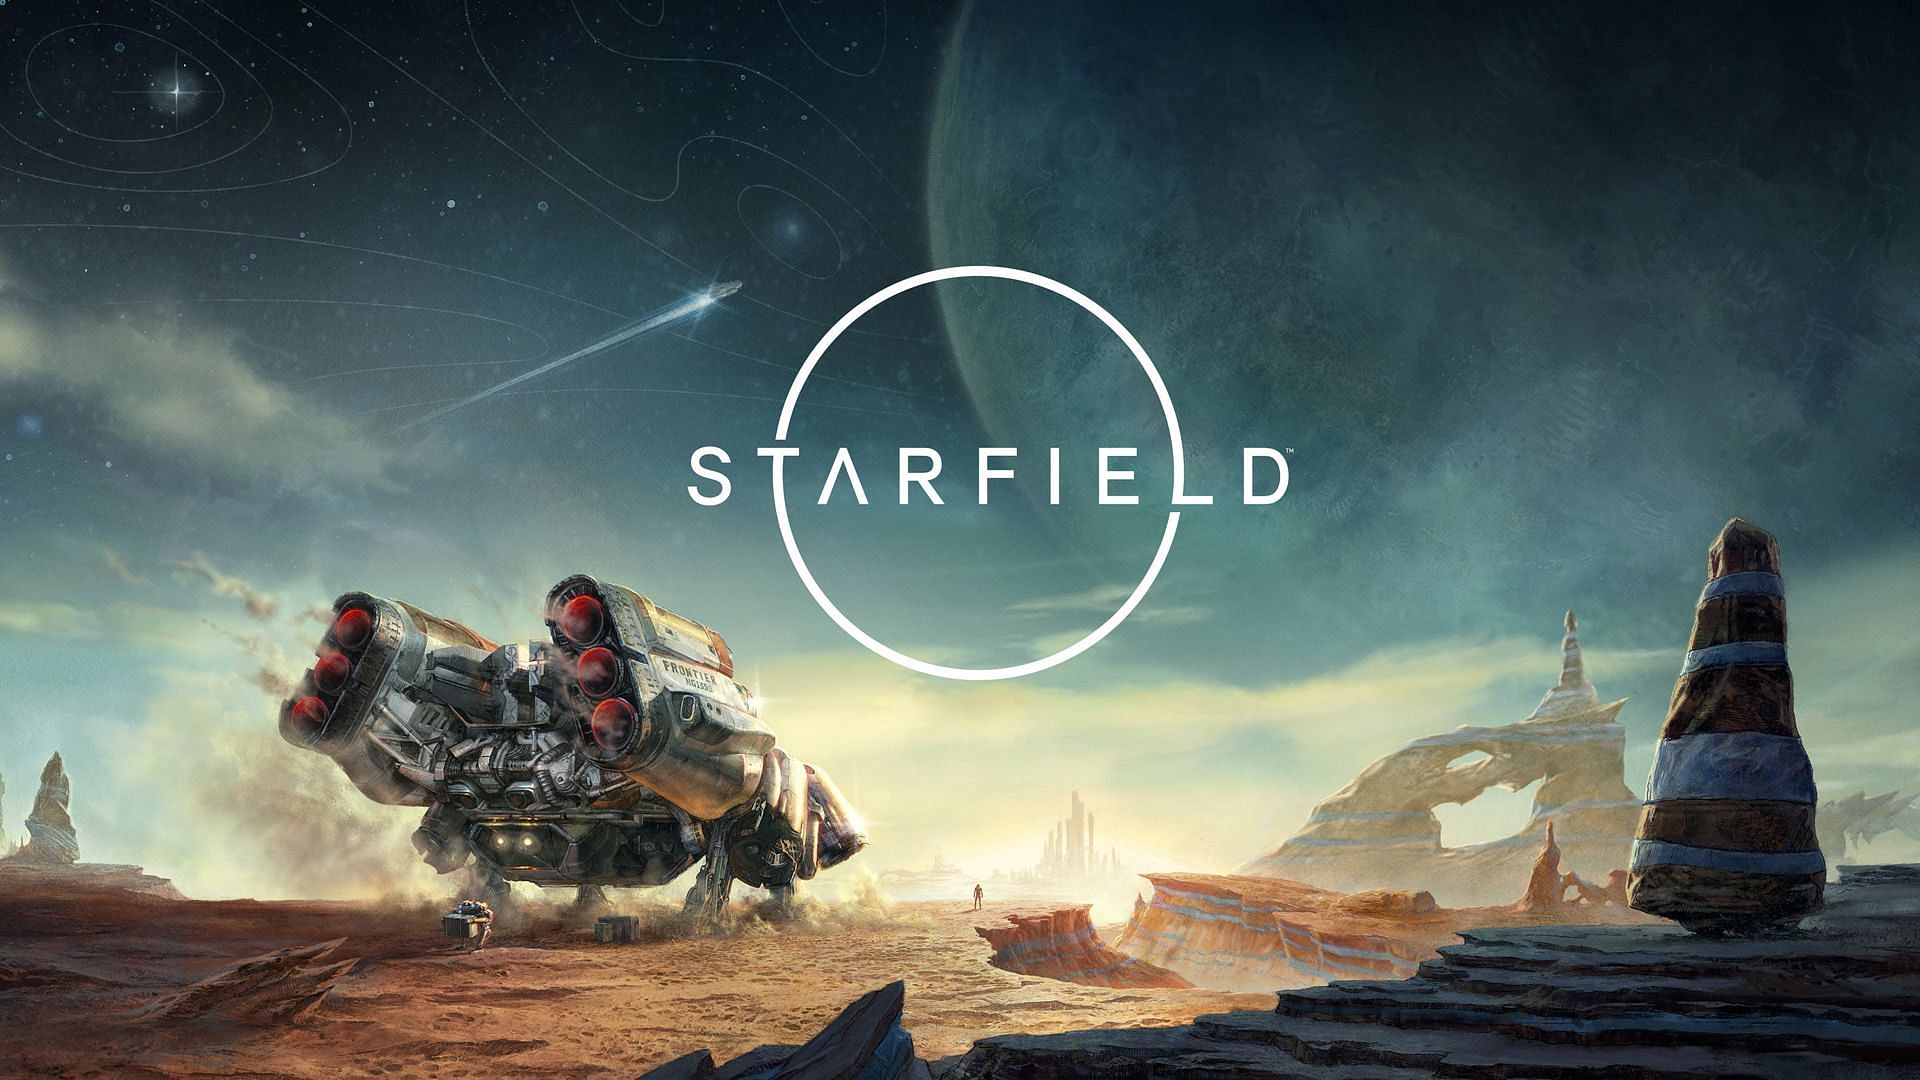 Starfield was too ambitious but boring at the same time (image via Xbox, Bethesda Softworks)